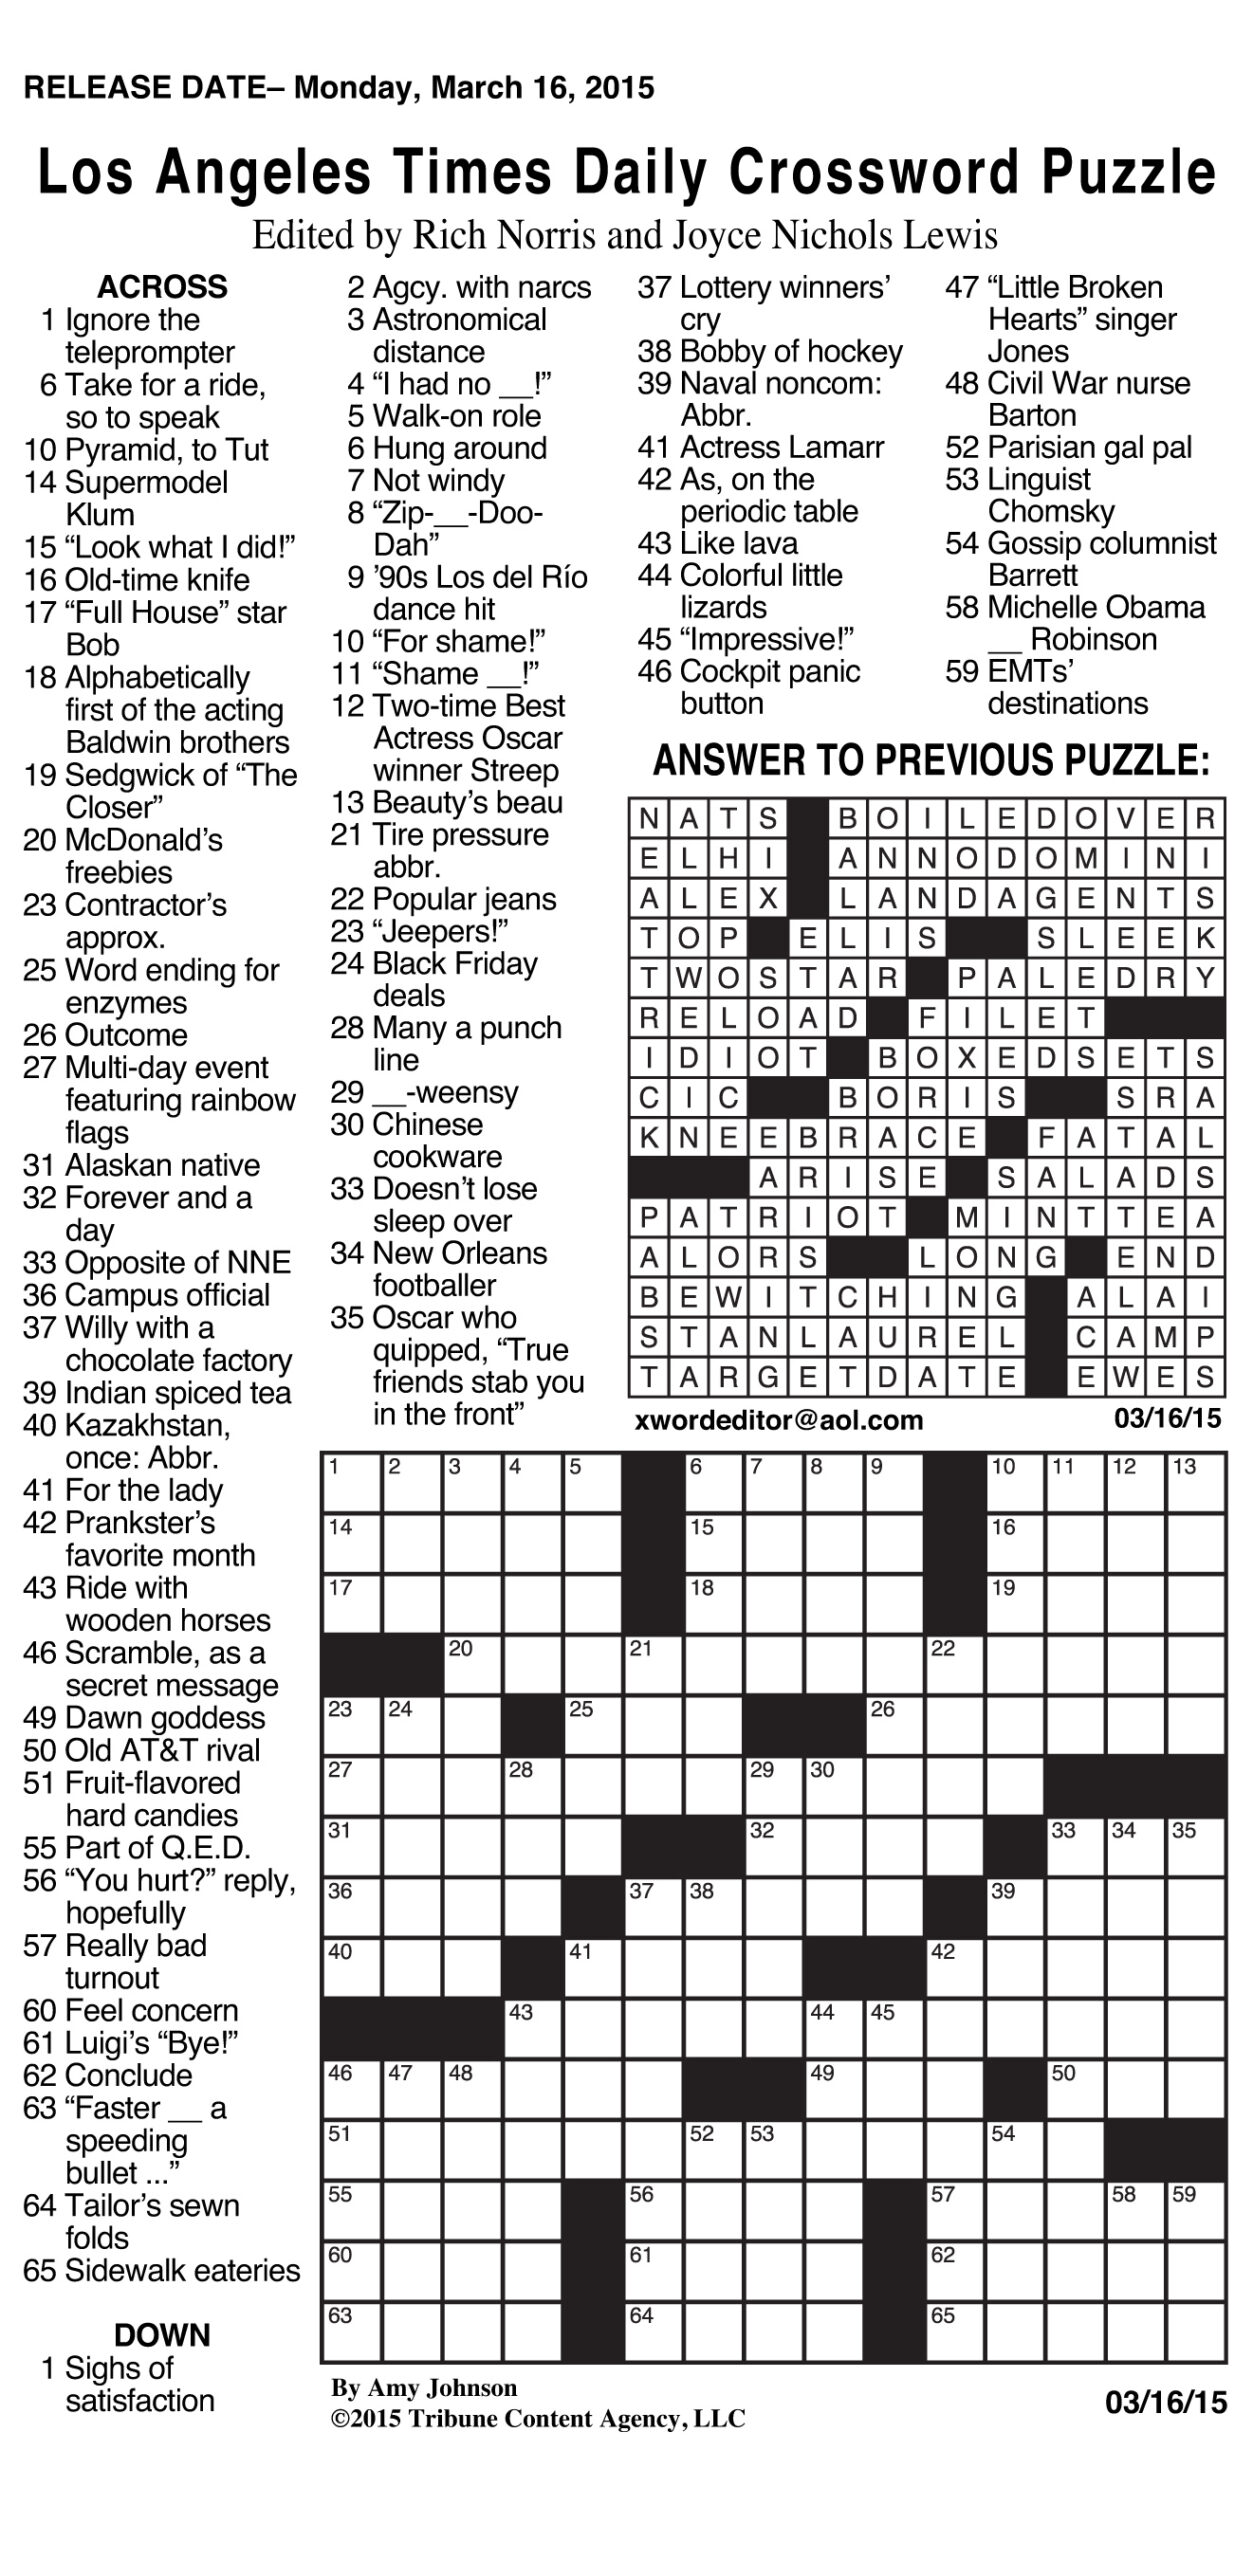 Sample Of Los Angeles Times Daily Crossword Puzzle Tribune Content 